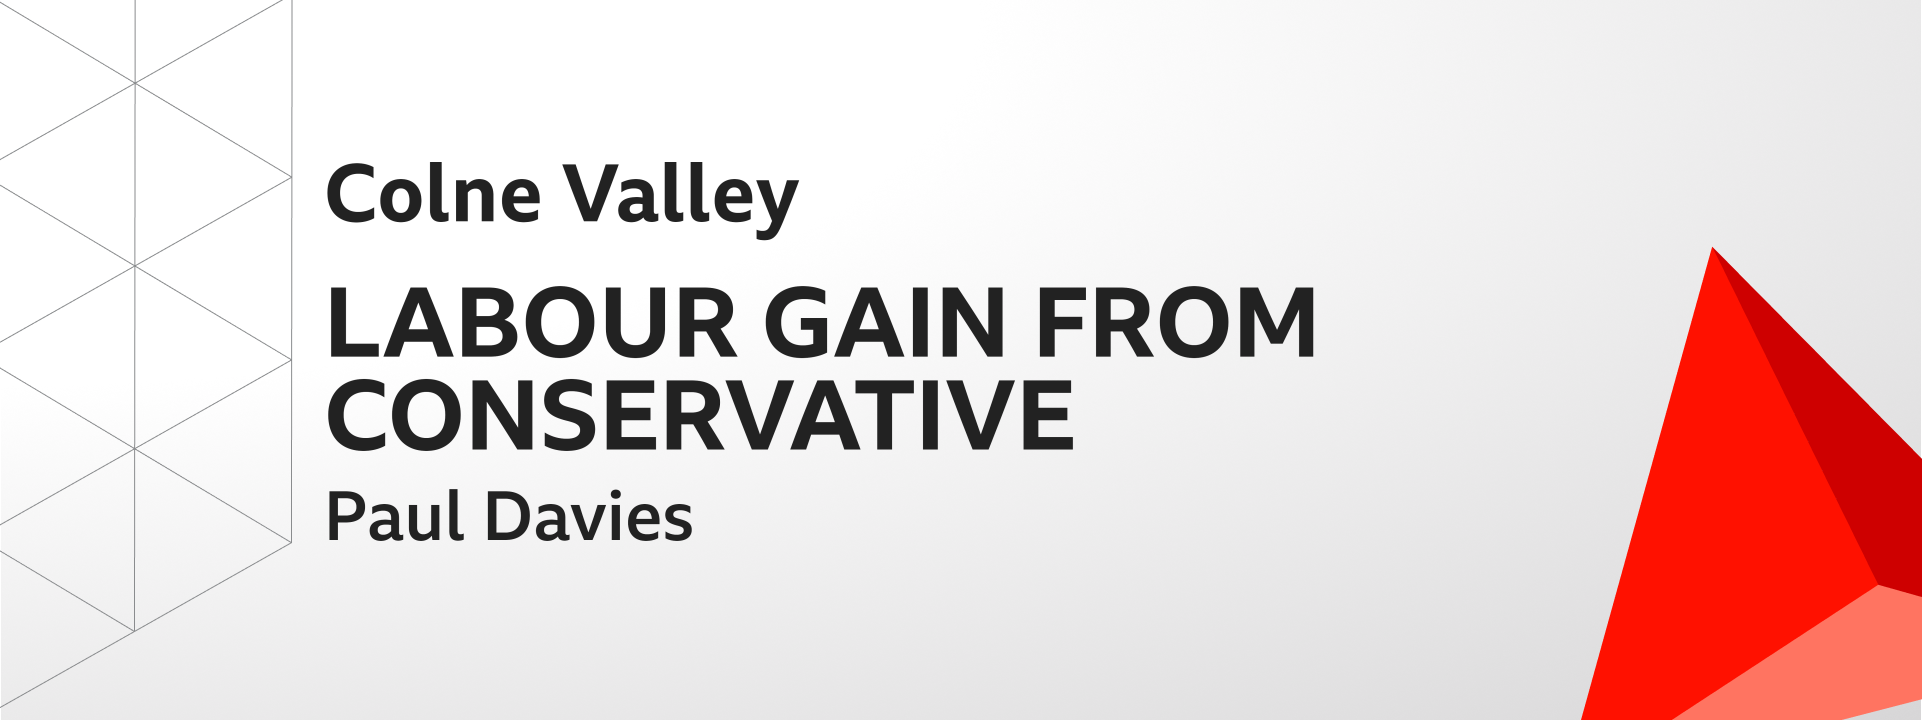 Graphic showing Labour gains Colne Valley from the Conservatives. The winning candidate was Paul Davies.